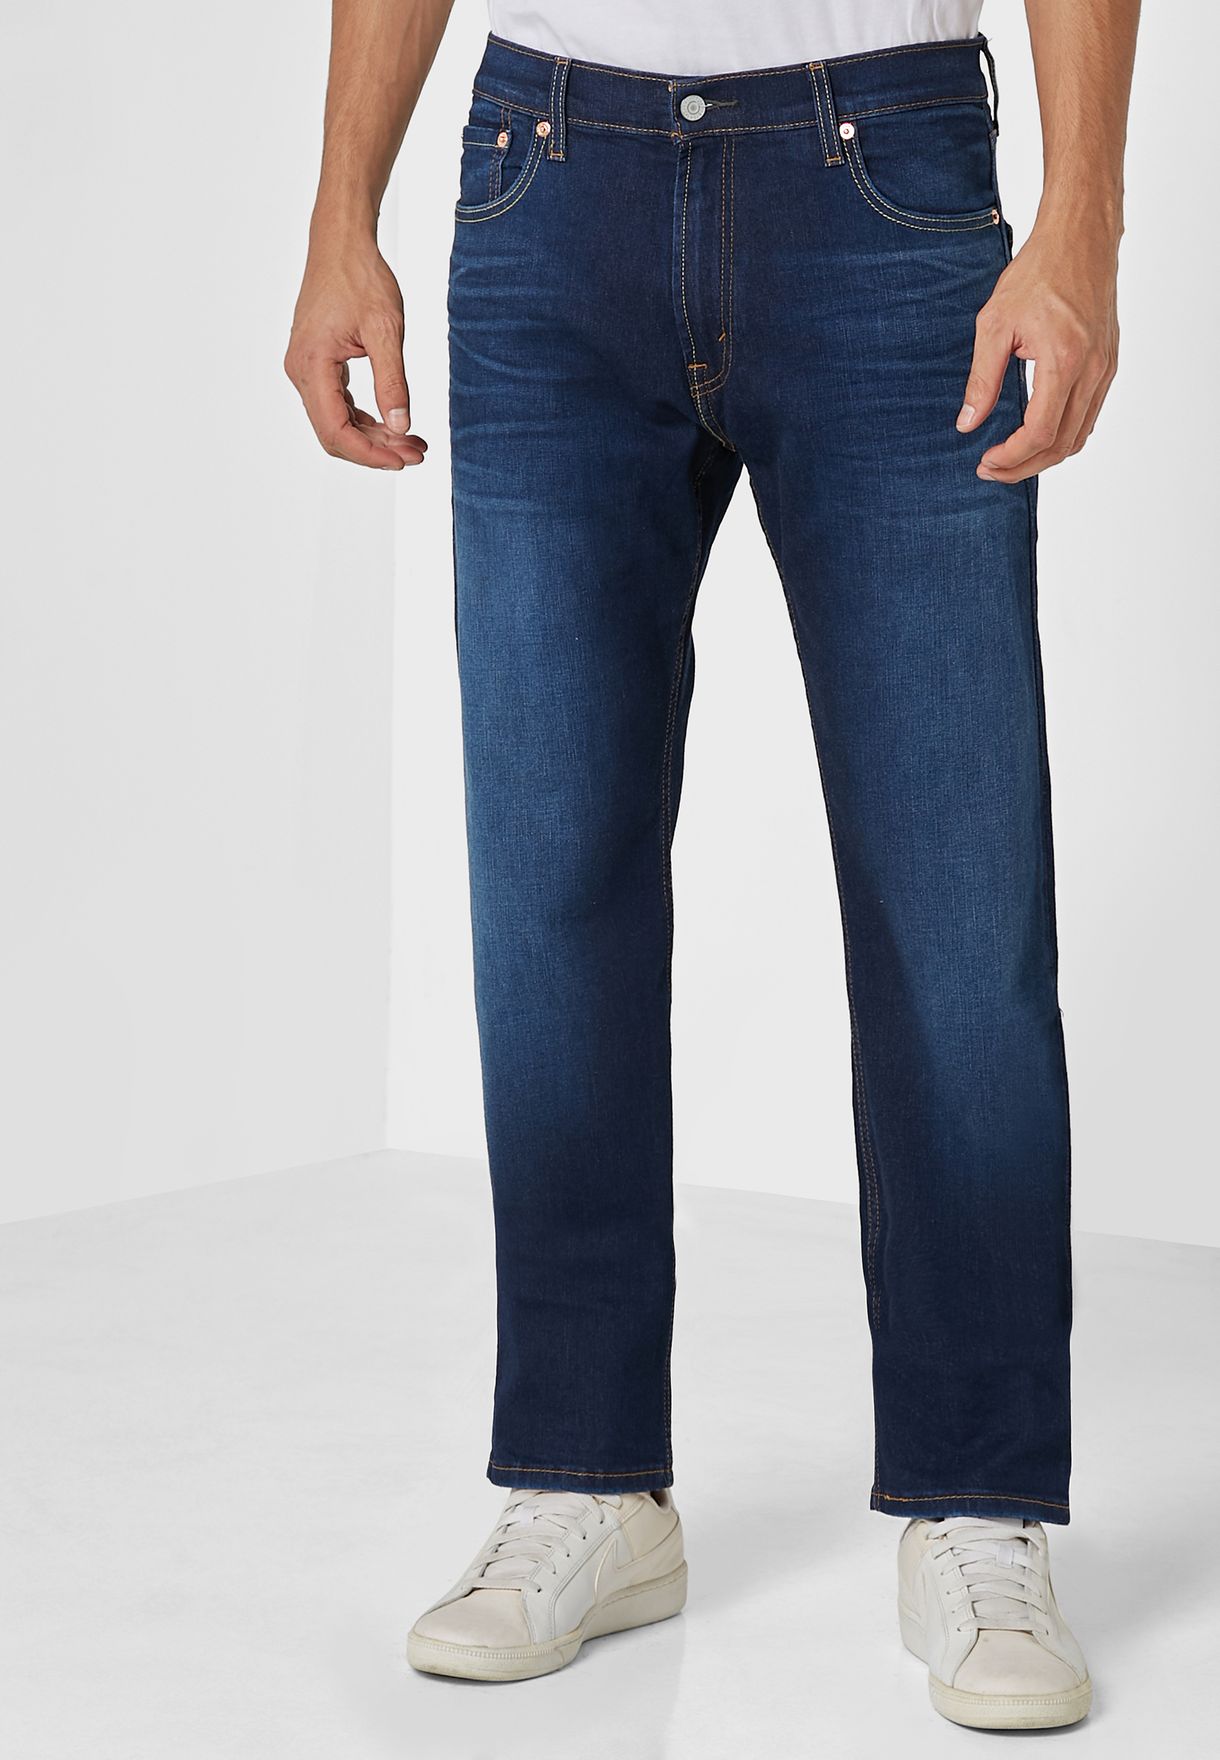 Buy Levis blue Authentic Straight Fit Jeans for Men in Dubai, Abu Dhabi